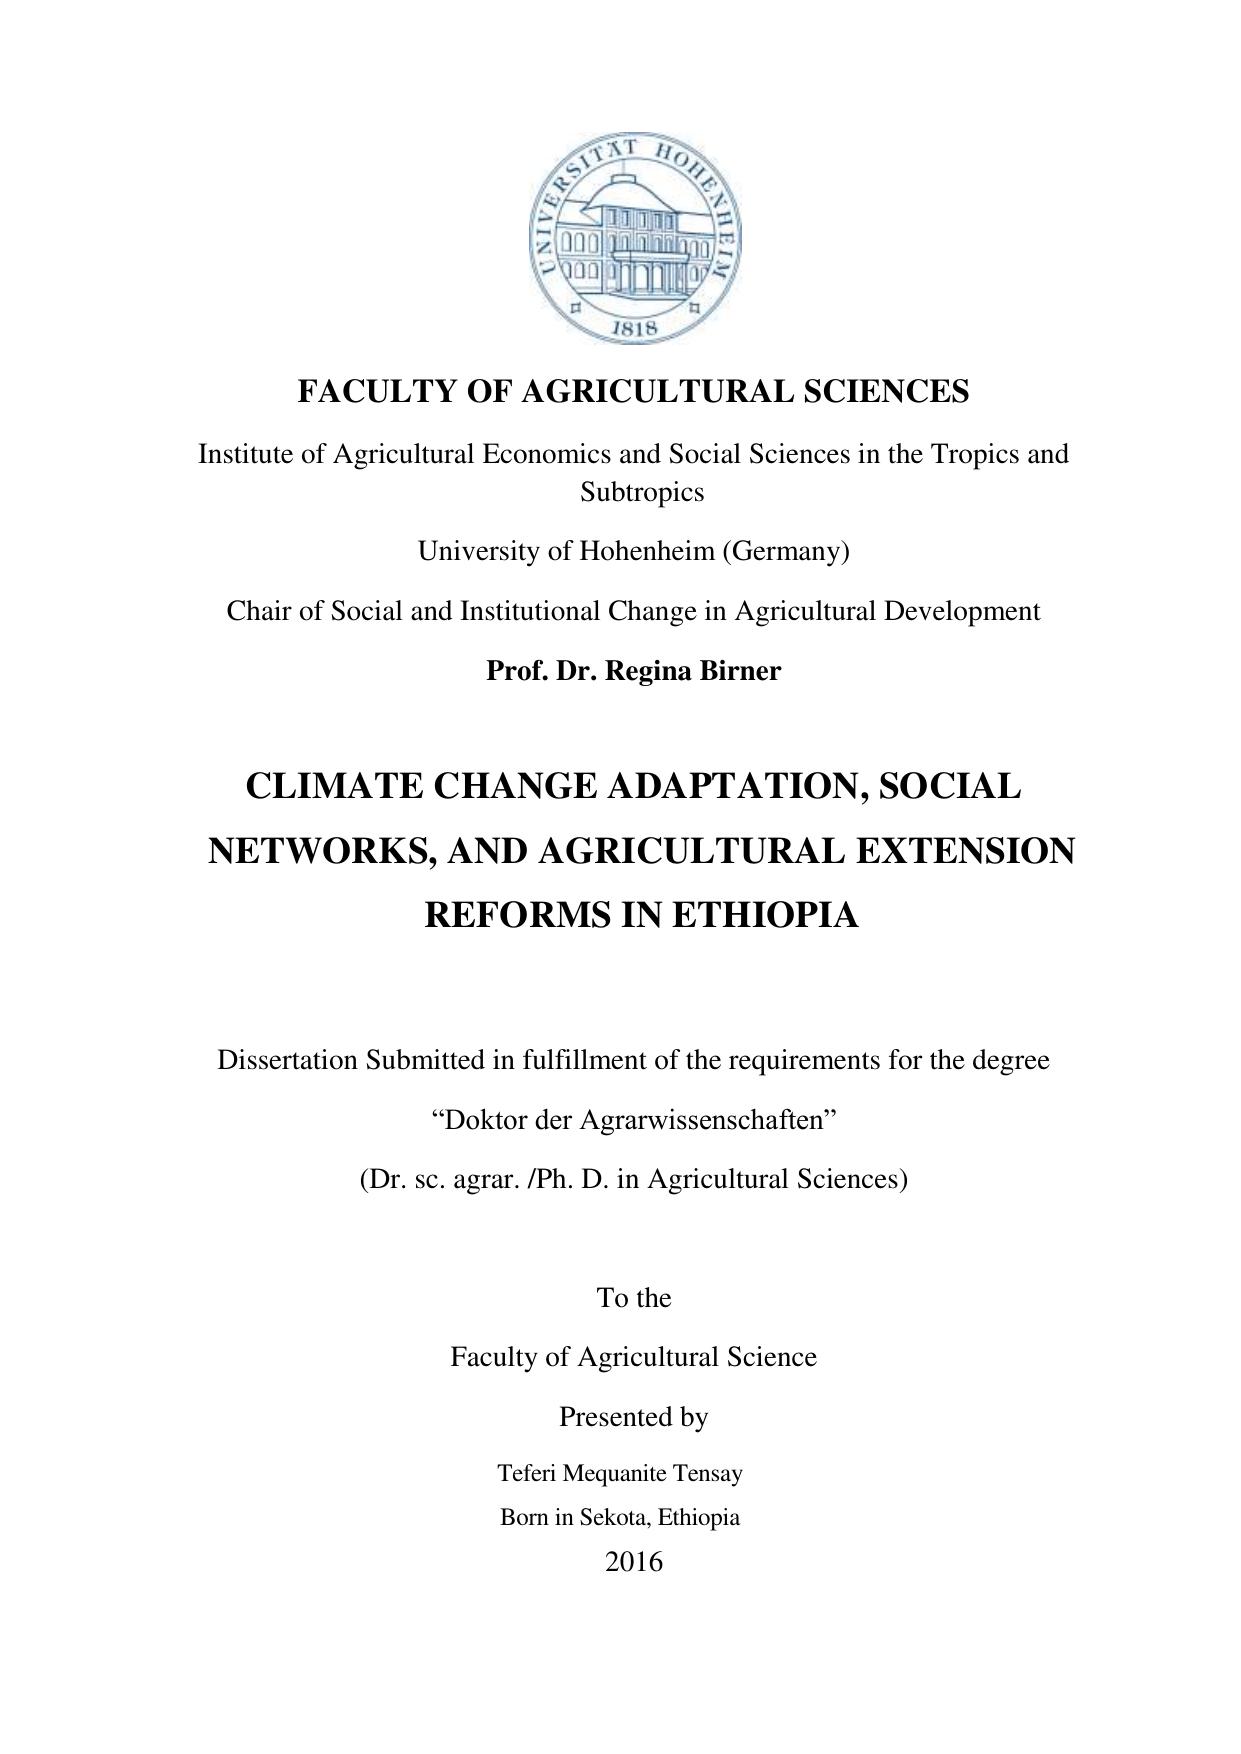 CLIMATE CHANGE ADAPTATION, SOCIAL NETWORKS, AND AGRICULTURAL EXTENSION REFORMS IN ETHIOPIA 2016